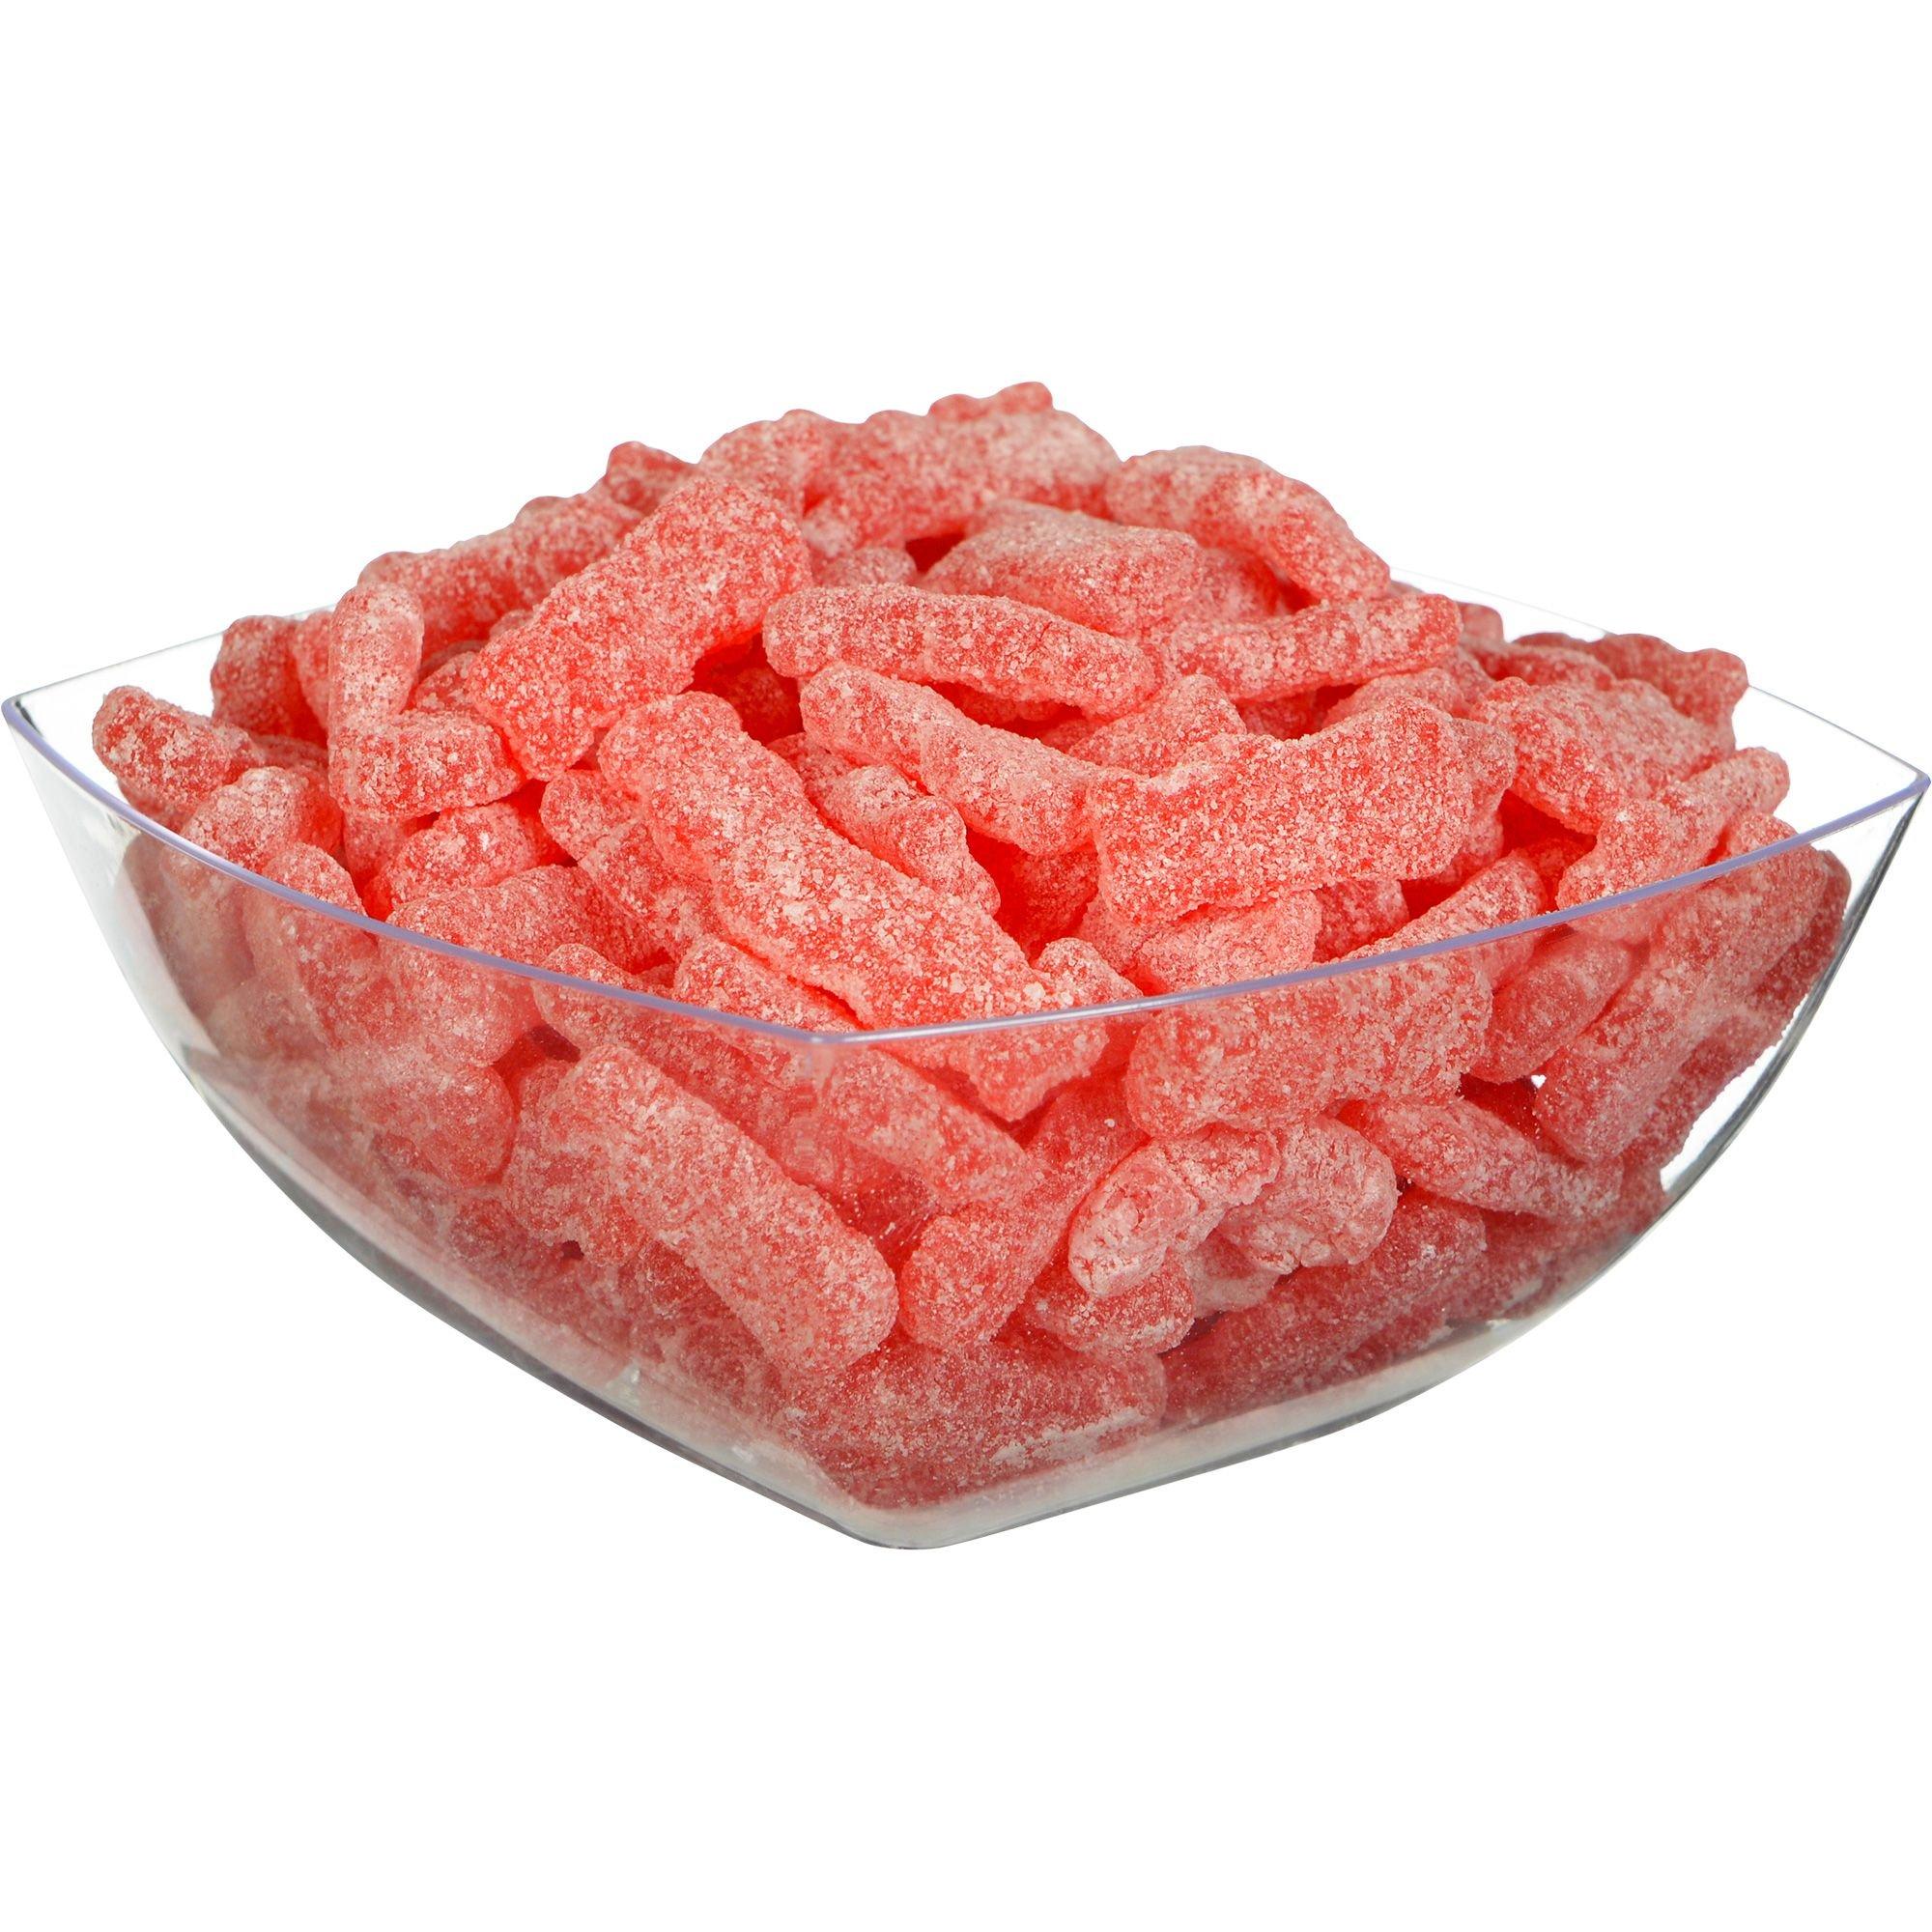 Red Sour Patch Kids, 16oz - Red Berry Flavor